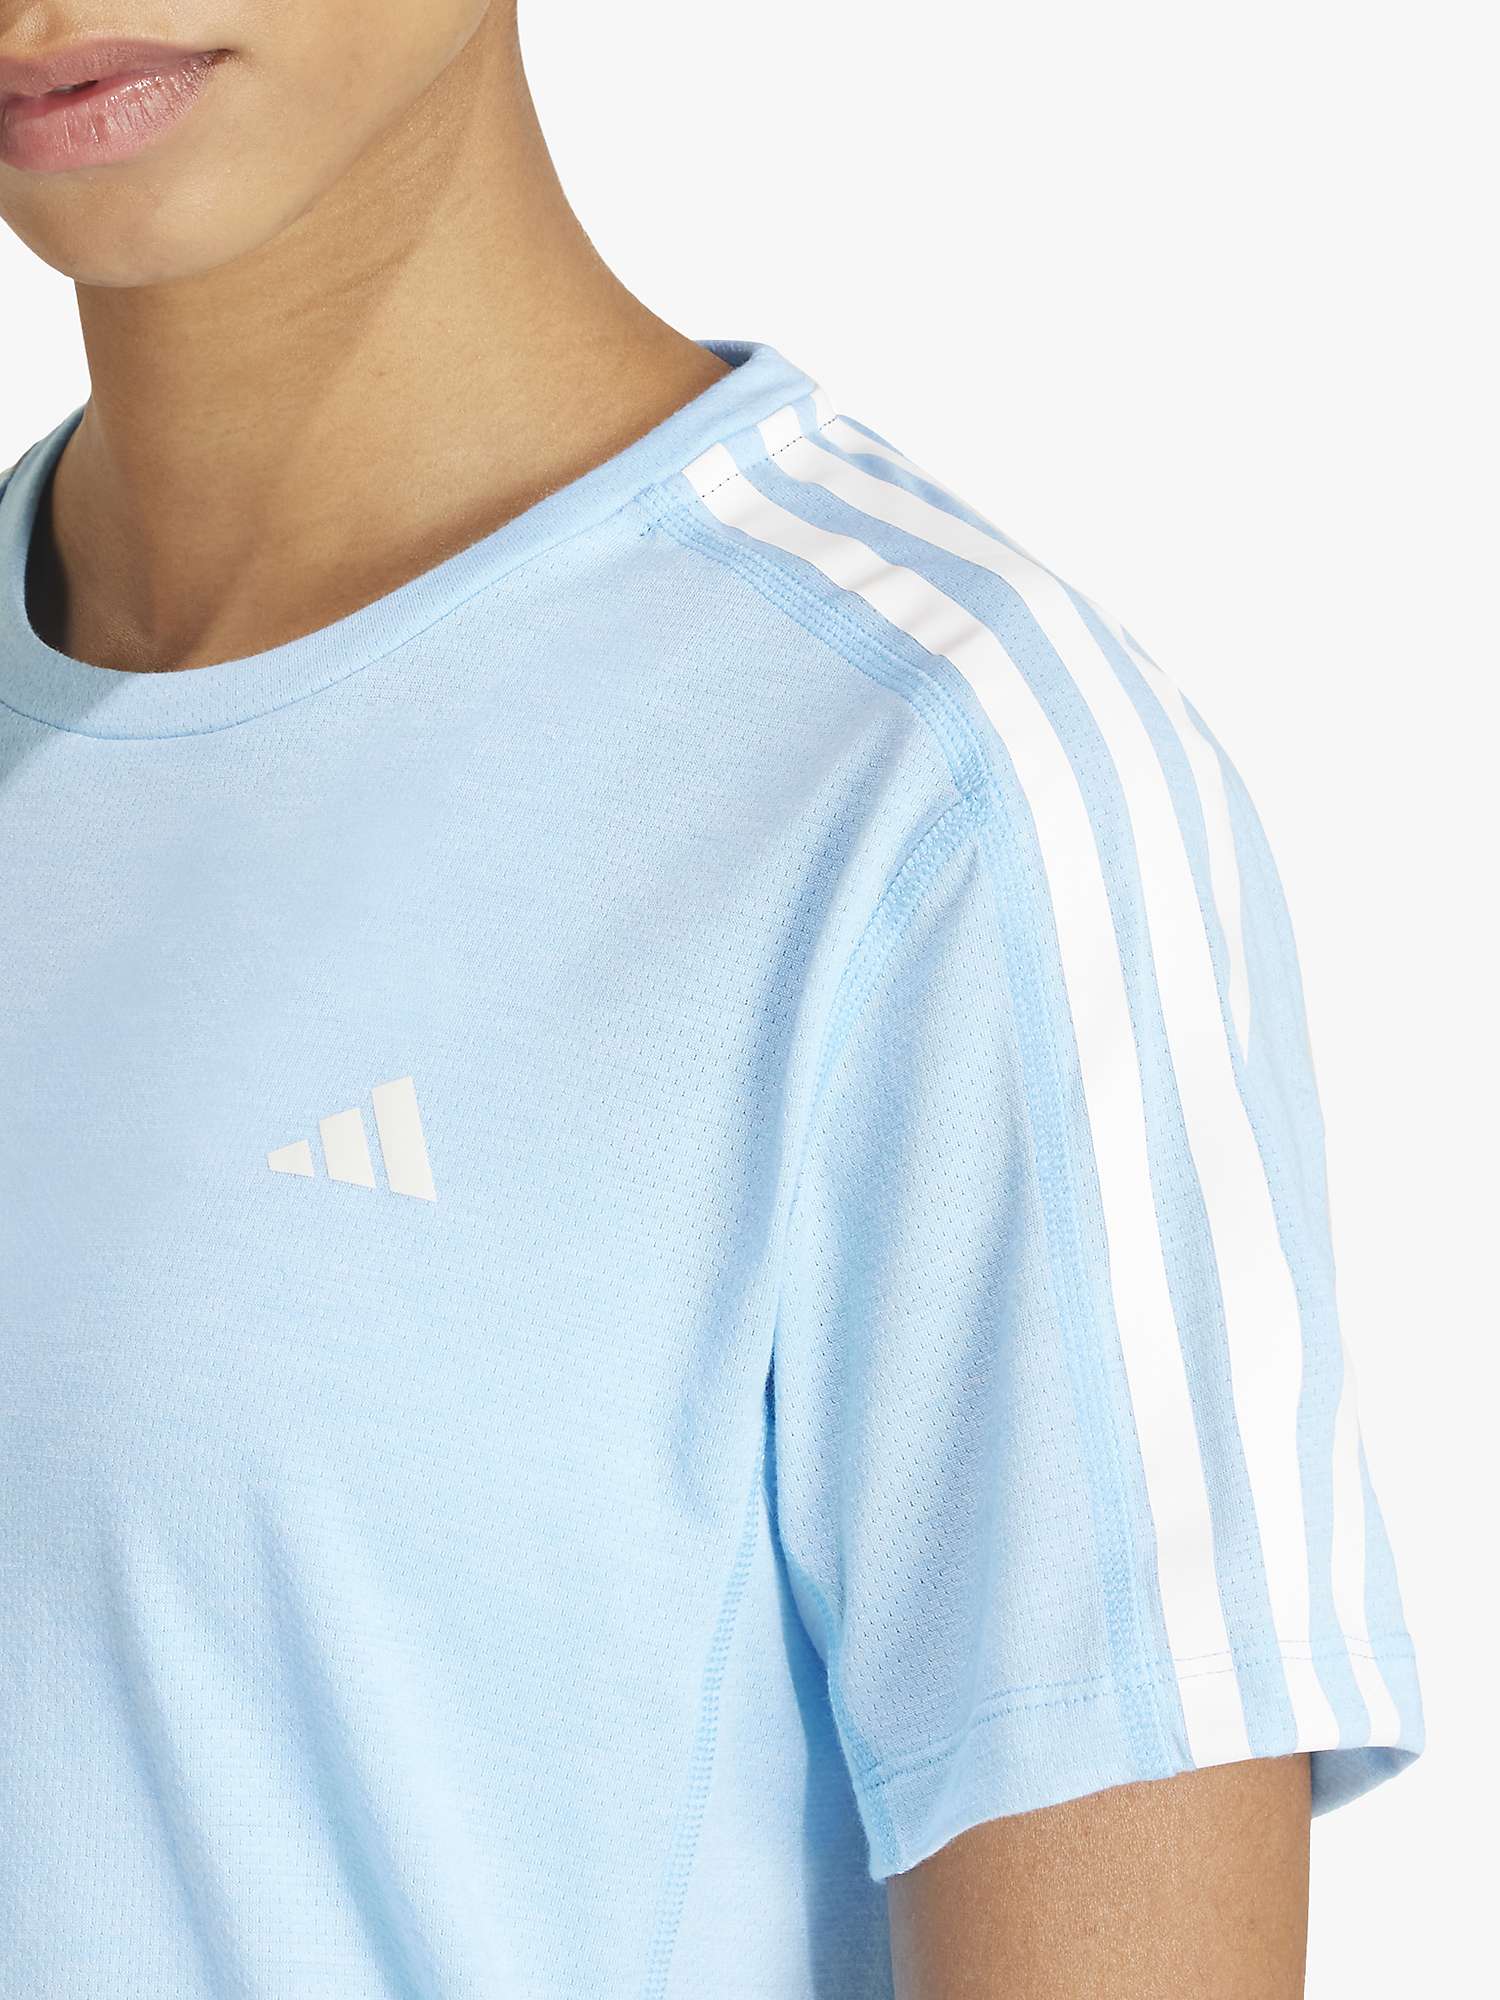 Buy adidas Own The Run 3 Stripes T-Shirt, Blue/White Online at johnlewis.com